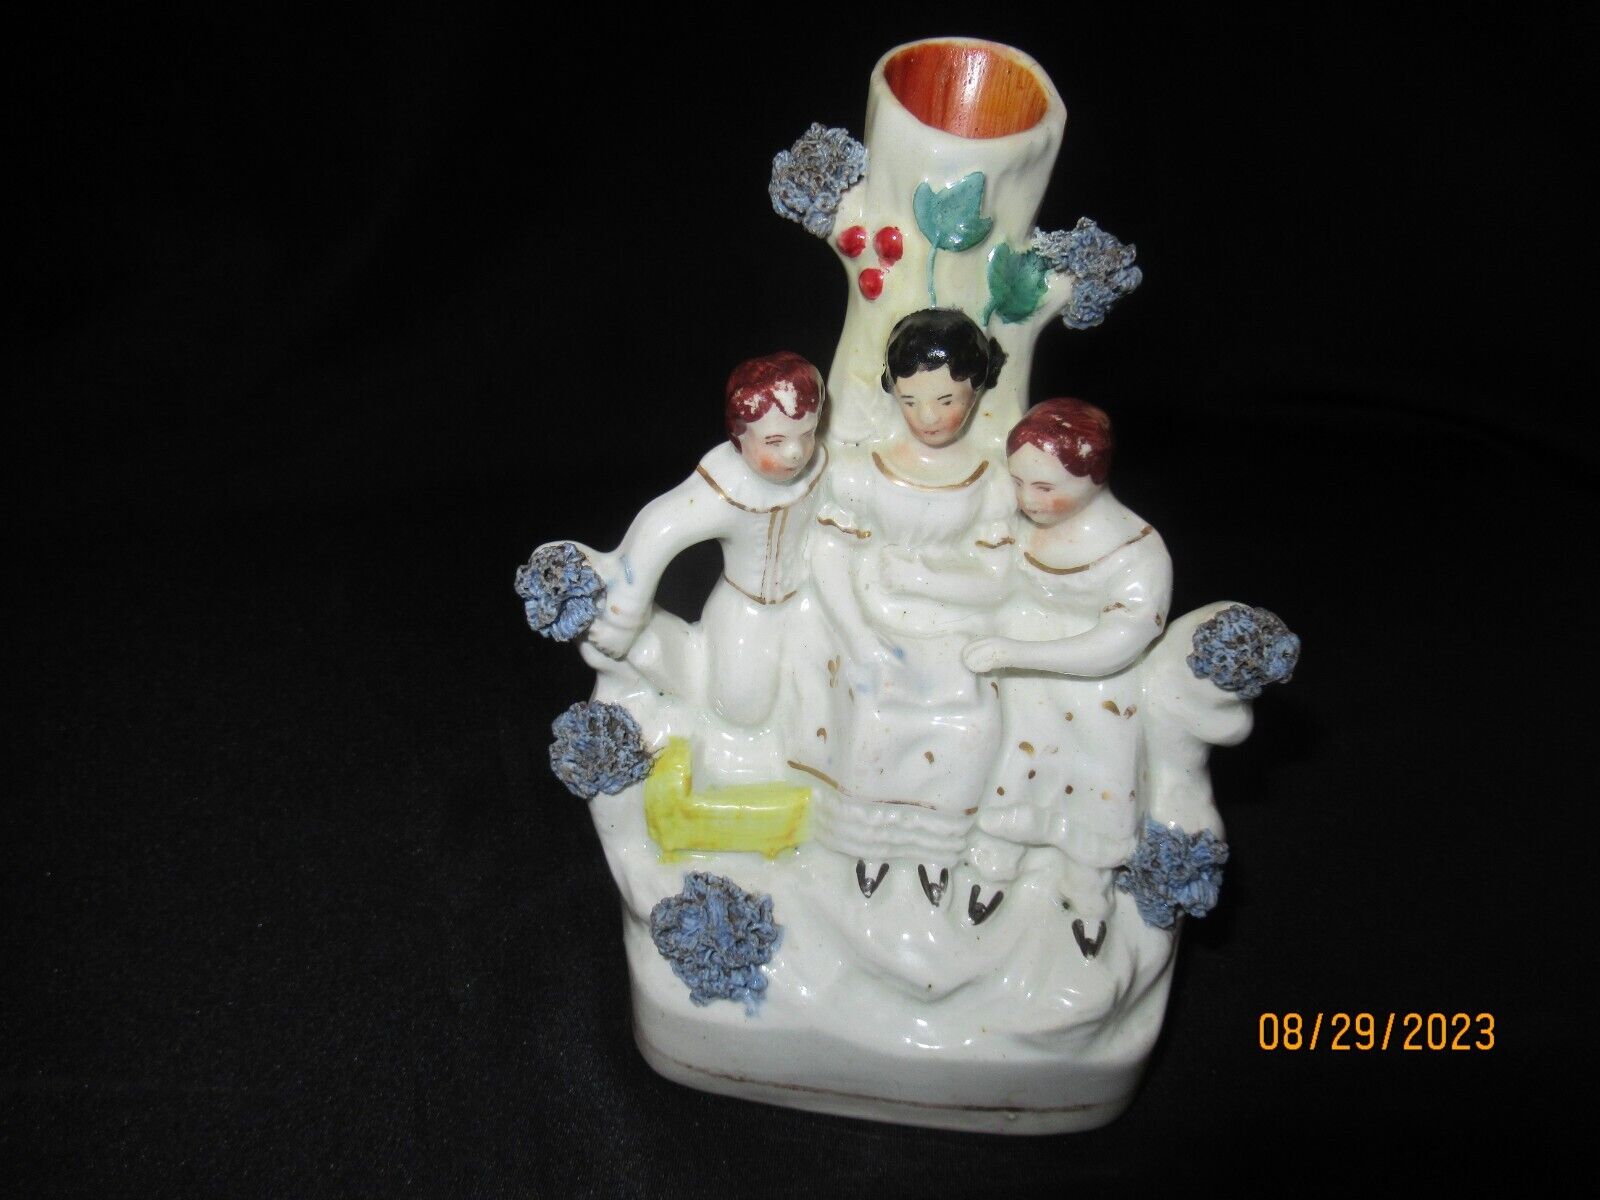 Antique English Staffordshire  Spill Vase 3 Youthful Figures Seated Mid -19th c.